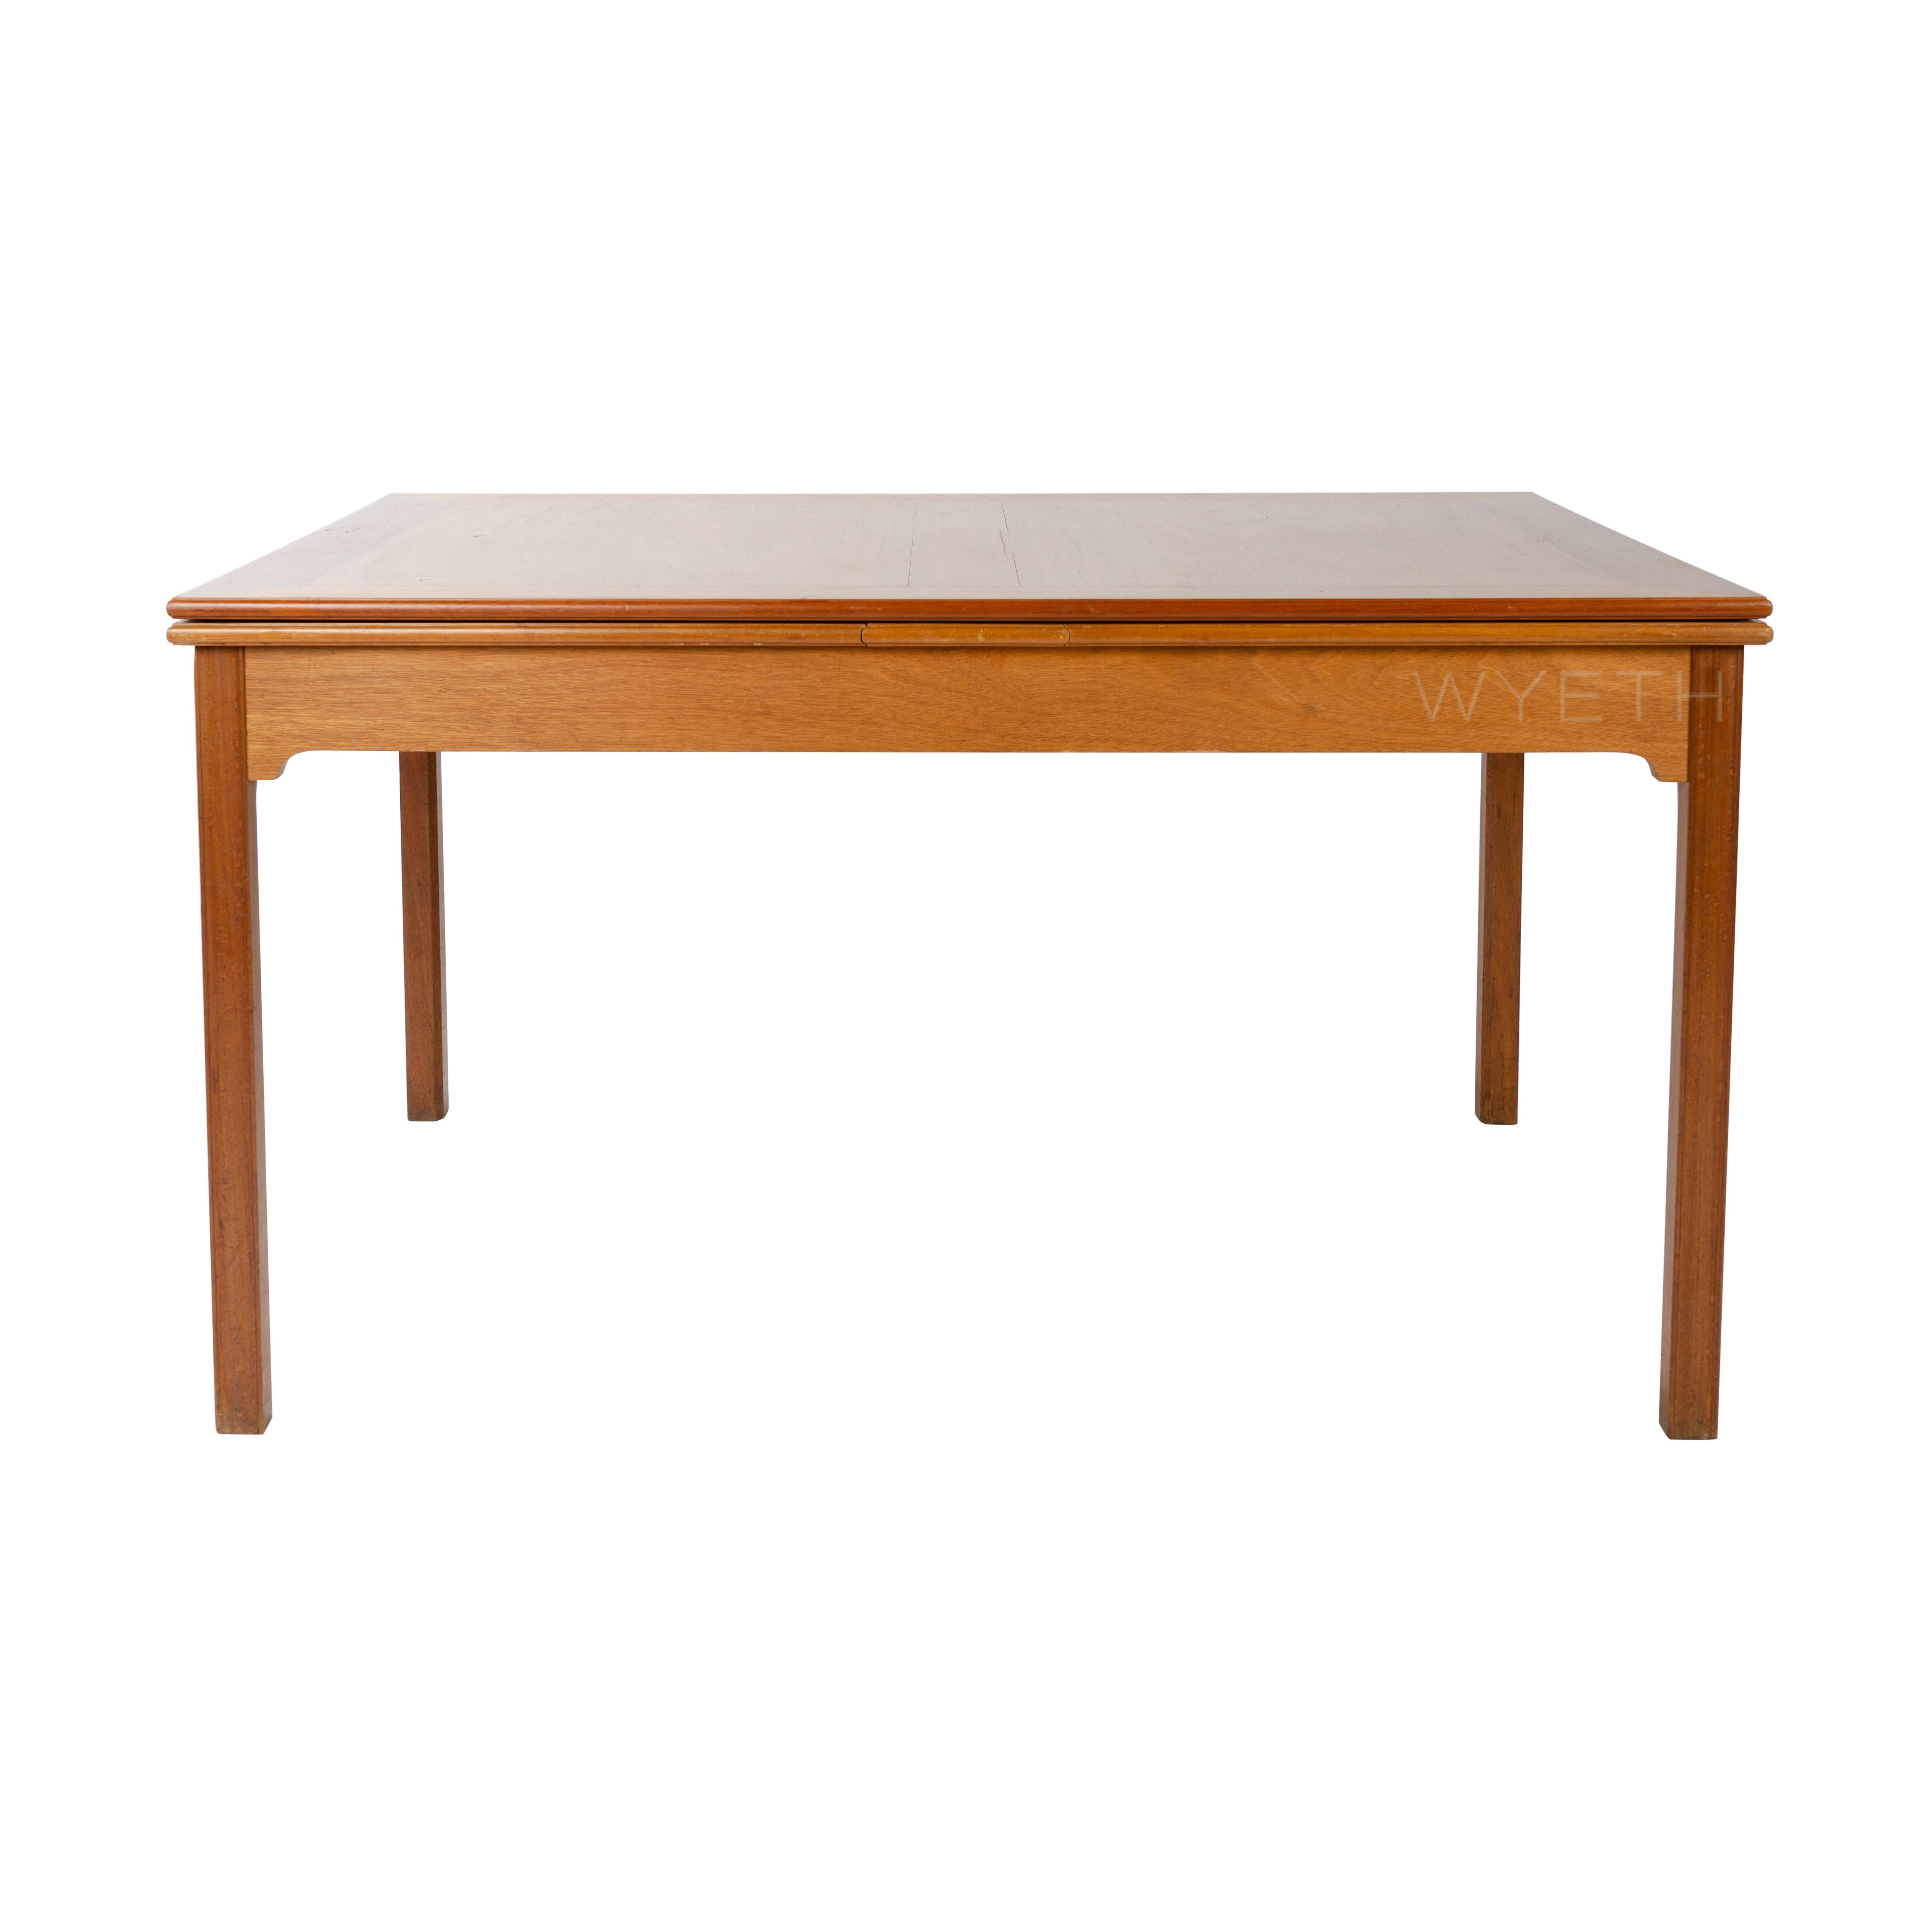 A model 4229 dining table in solid mahogany with two extension leaves.